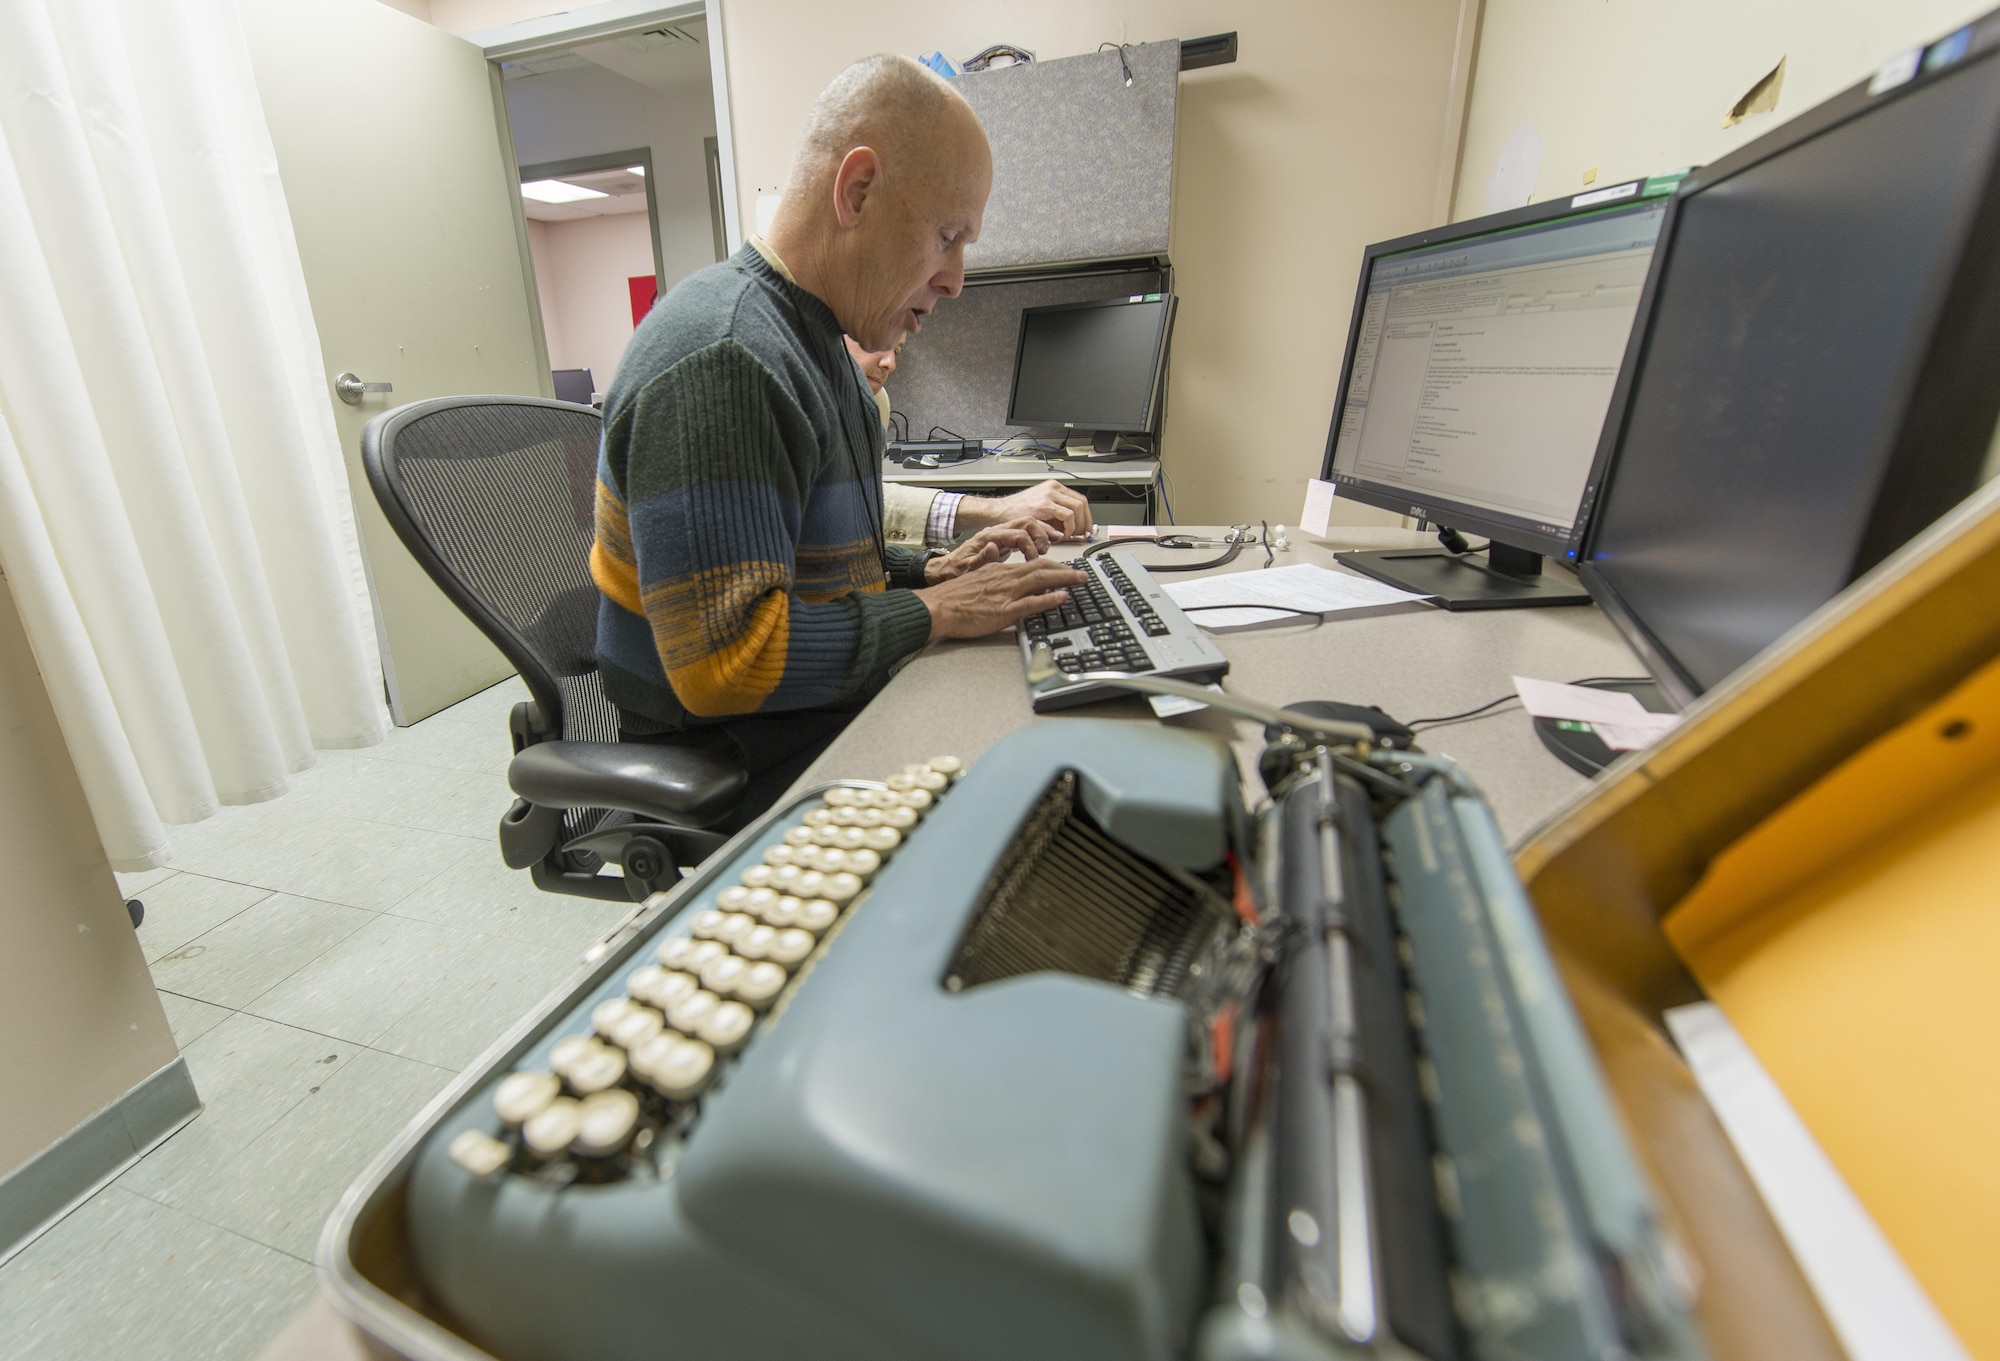 Retired Col. Pete Mapes, a pilot-physician, still uses a typewriter when he sees patients at the Joint Base Andrews, Md., Flight Medicine Clinic, April 7, 2016. Mapes was instrumental to the employment of the Automatic Ground Collision Avoidance System (Auto GCAS) in fighter jets across the Air Force after he discovered an error in the program data while at the Air Force Research Lab at Wright Patterson AFB, Ohio in 2003. The system, which constantly compares the aircraft's speed and position to a digital terrain map and will automatically take control if it detects an imminent ground collision, is credited with saving the lives of four pilots. (U.S. Air Force photo/Master Sgt. Brian Ferguson)